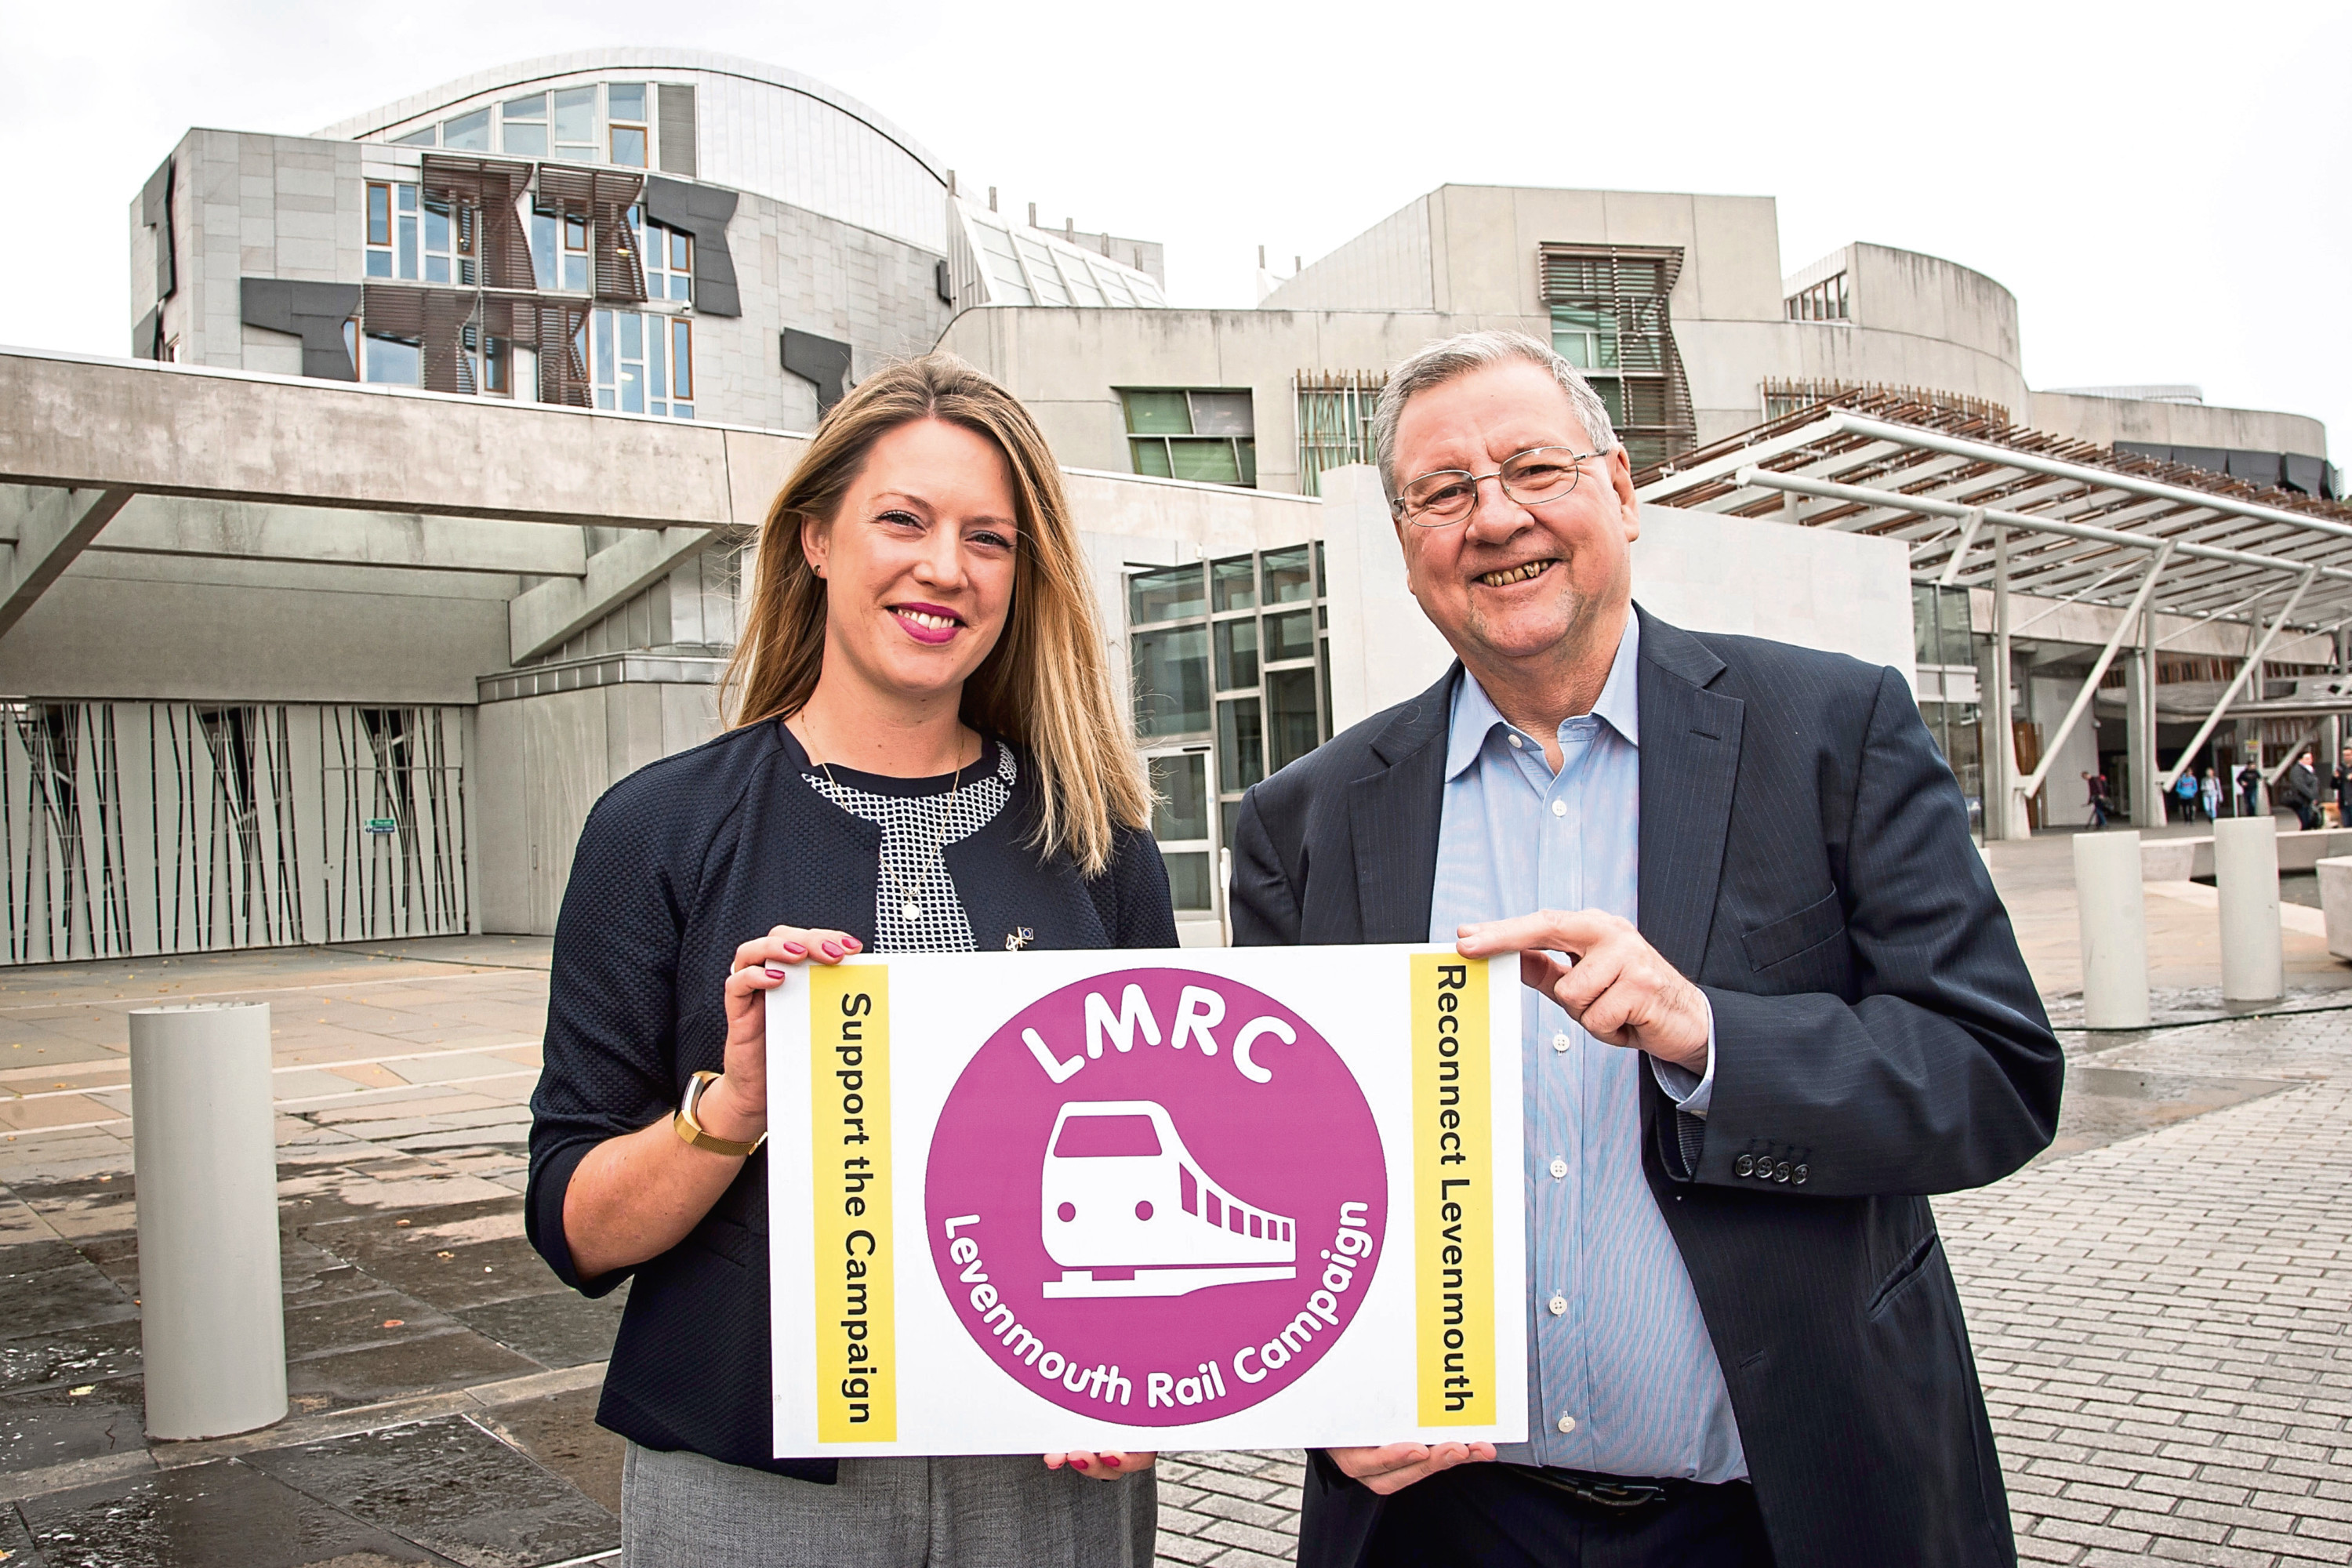 Jenny Gilruth MSP for Mid Fife and Glenrothes with Eugene Clarke, Chairman of Levenmouth Rail Campaign (LMRC) at the Scottish Parliament.